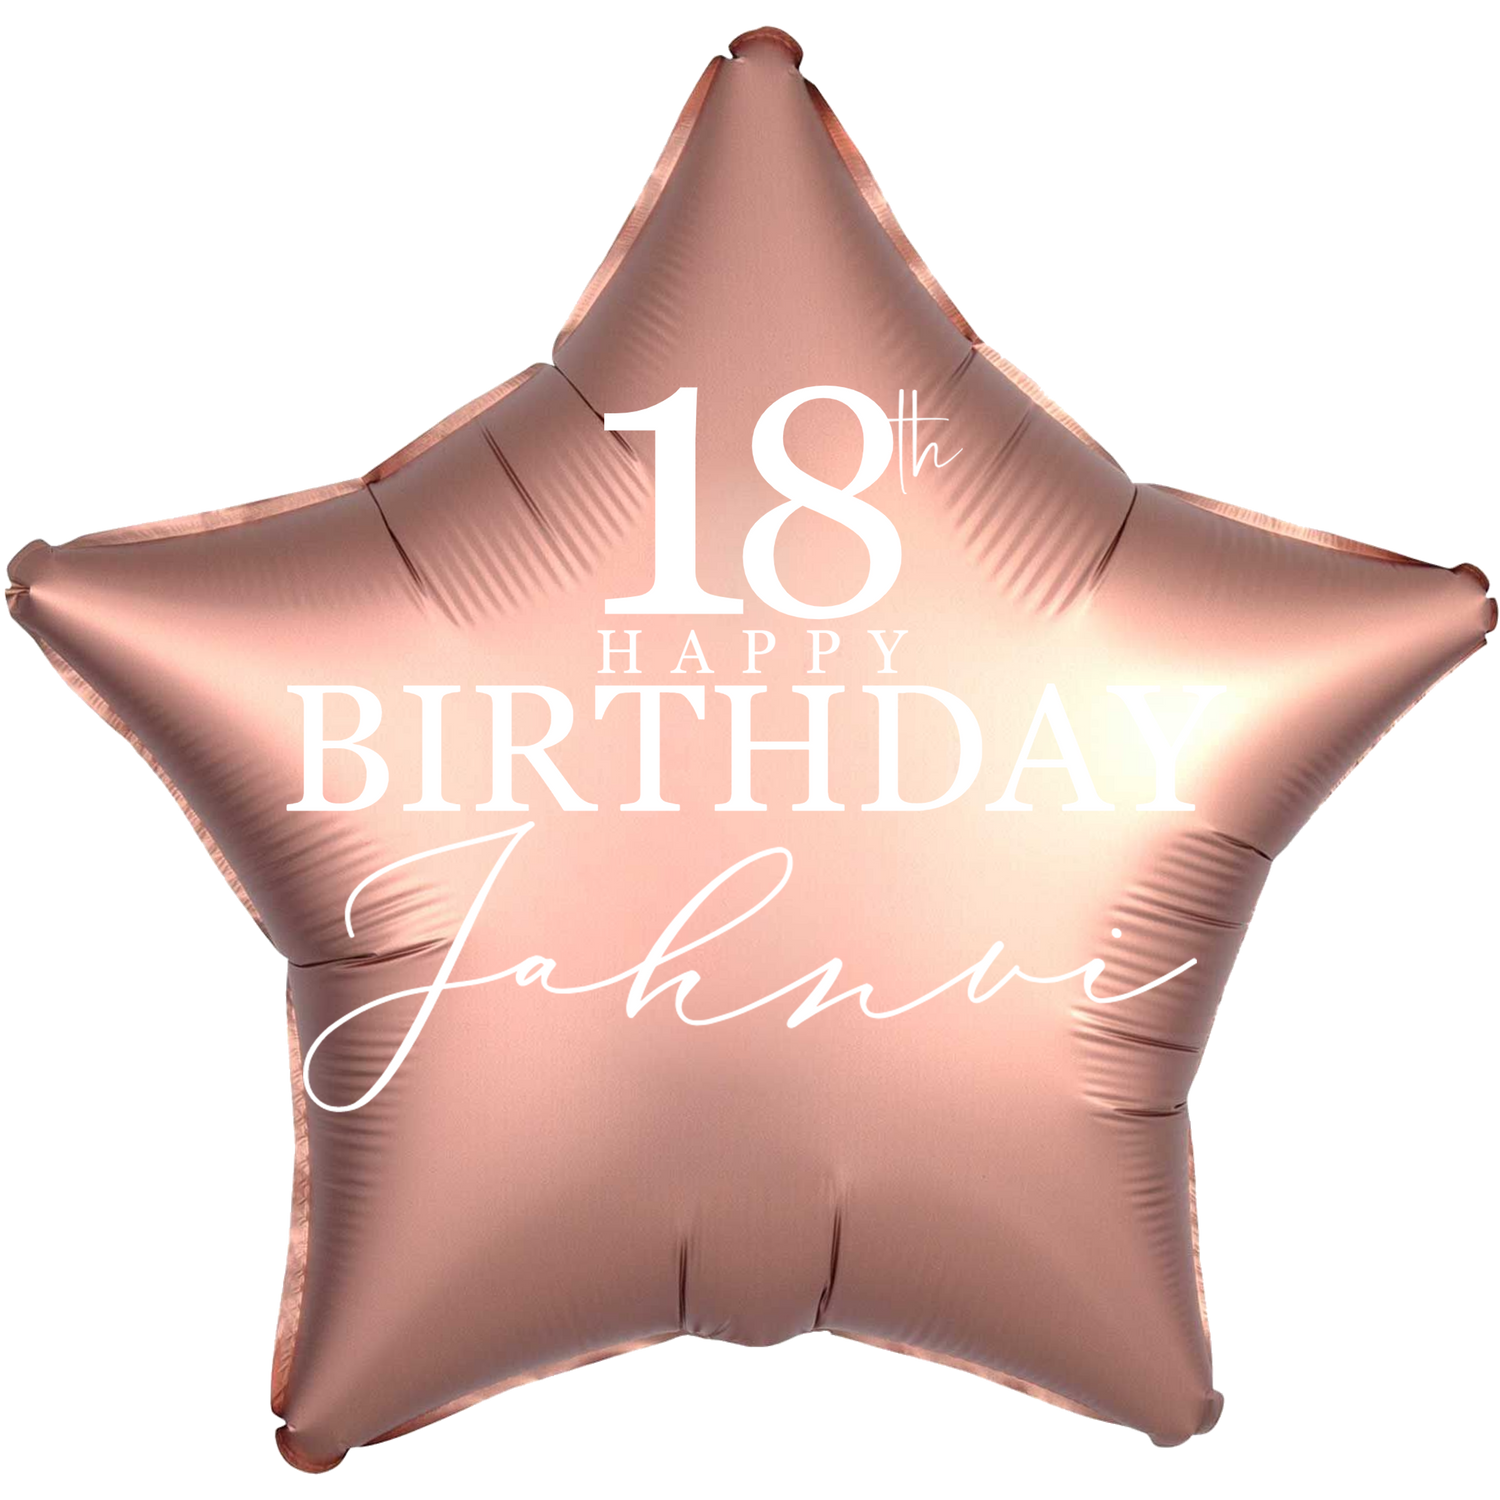 Personalized/Customized Custom Name/Text & Age Rose Gold Star Foil/Mylar Balloons For Six Months/First/Second/Third/Sixteenth/Twenty-First/Thirty/Forty/Fifty/Sixty/Seventieth Birthday, Milestone Birthday or a Special Themed Birthday Event. Supports Helium/Air, Luxury Bespoke Balloons Are a Perfect Surprise For Your Baby, Wife, Mom, Dad, Brother, Sister, Friends & Loved Ones